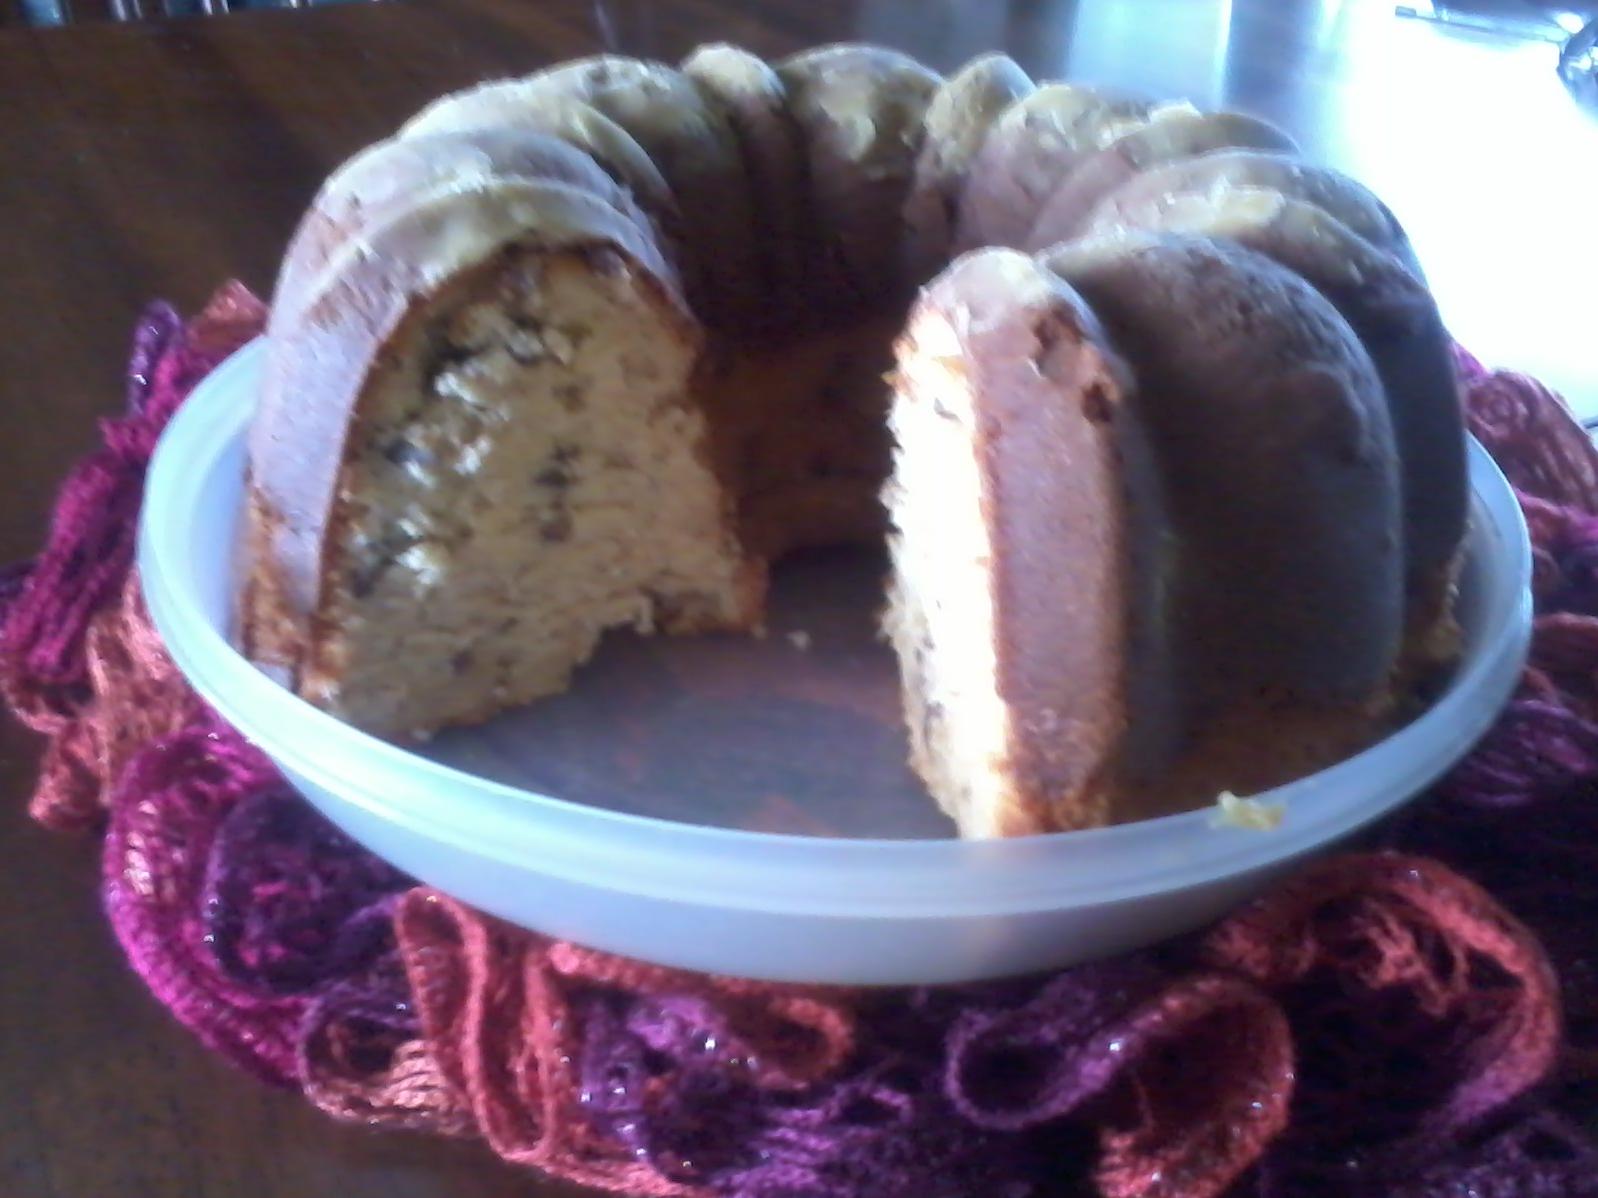  A cozy afternoon with a slice of Banana-Nut Pound Cake is just what you need.